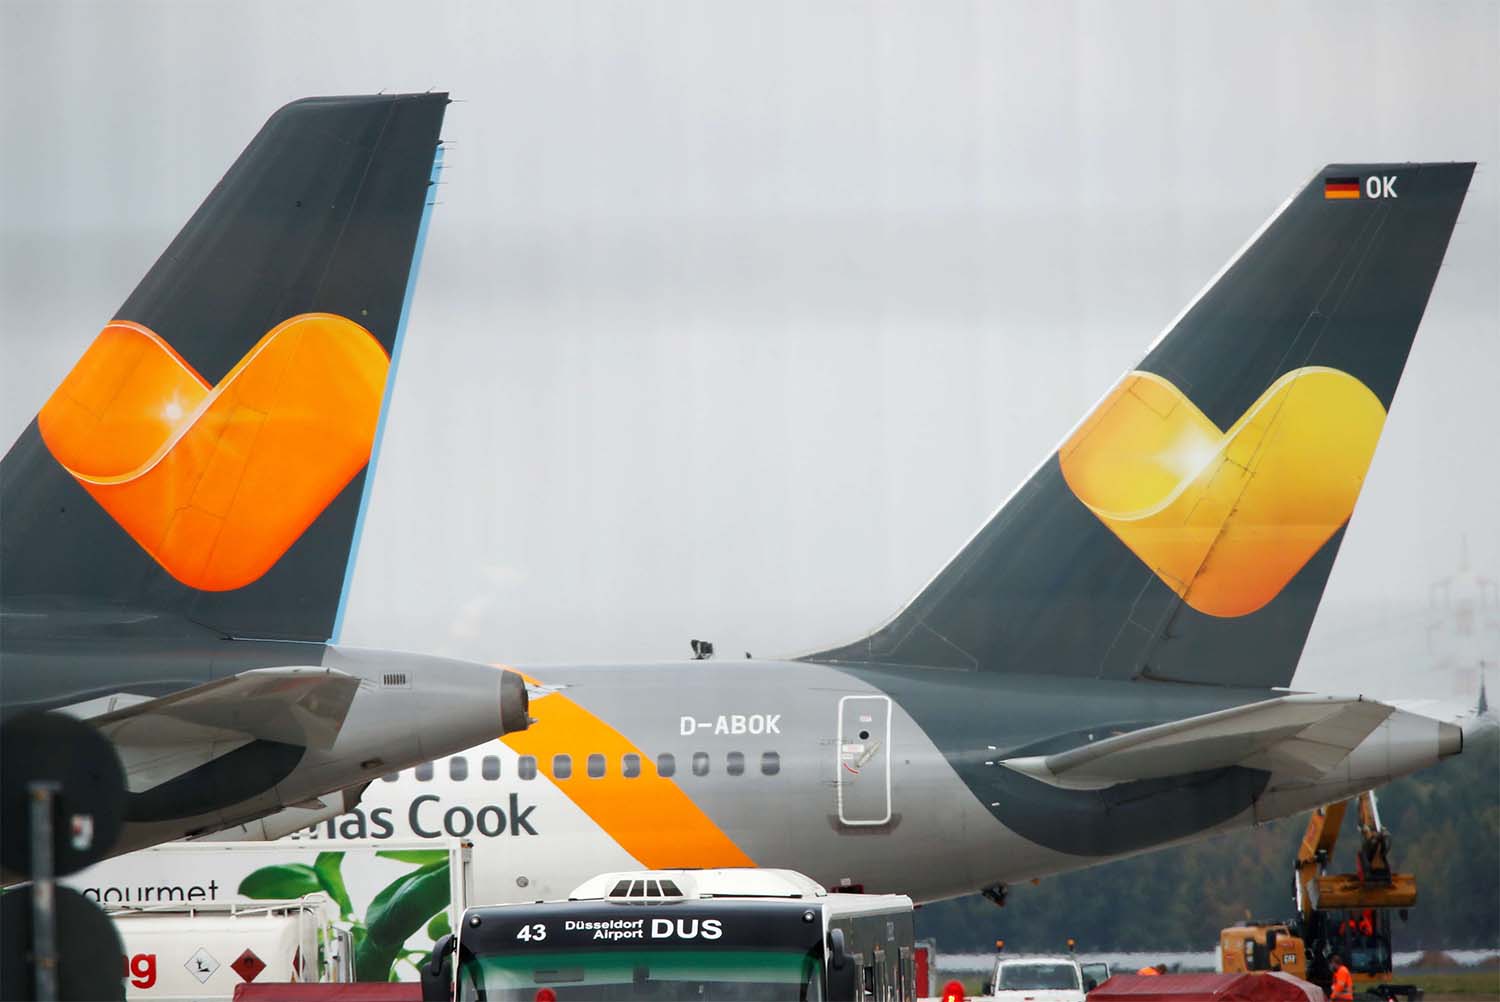 Thomas Cook, the world's oldest travel firm